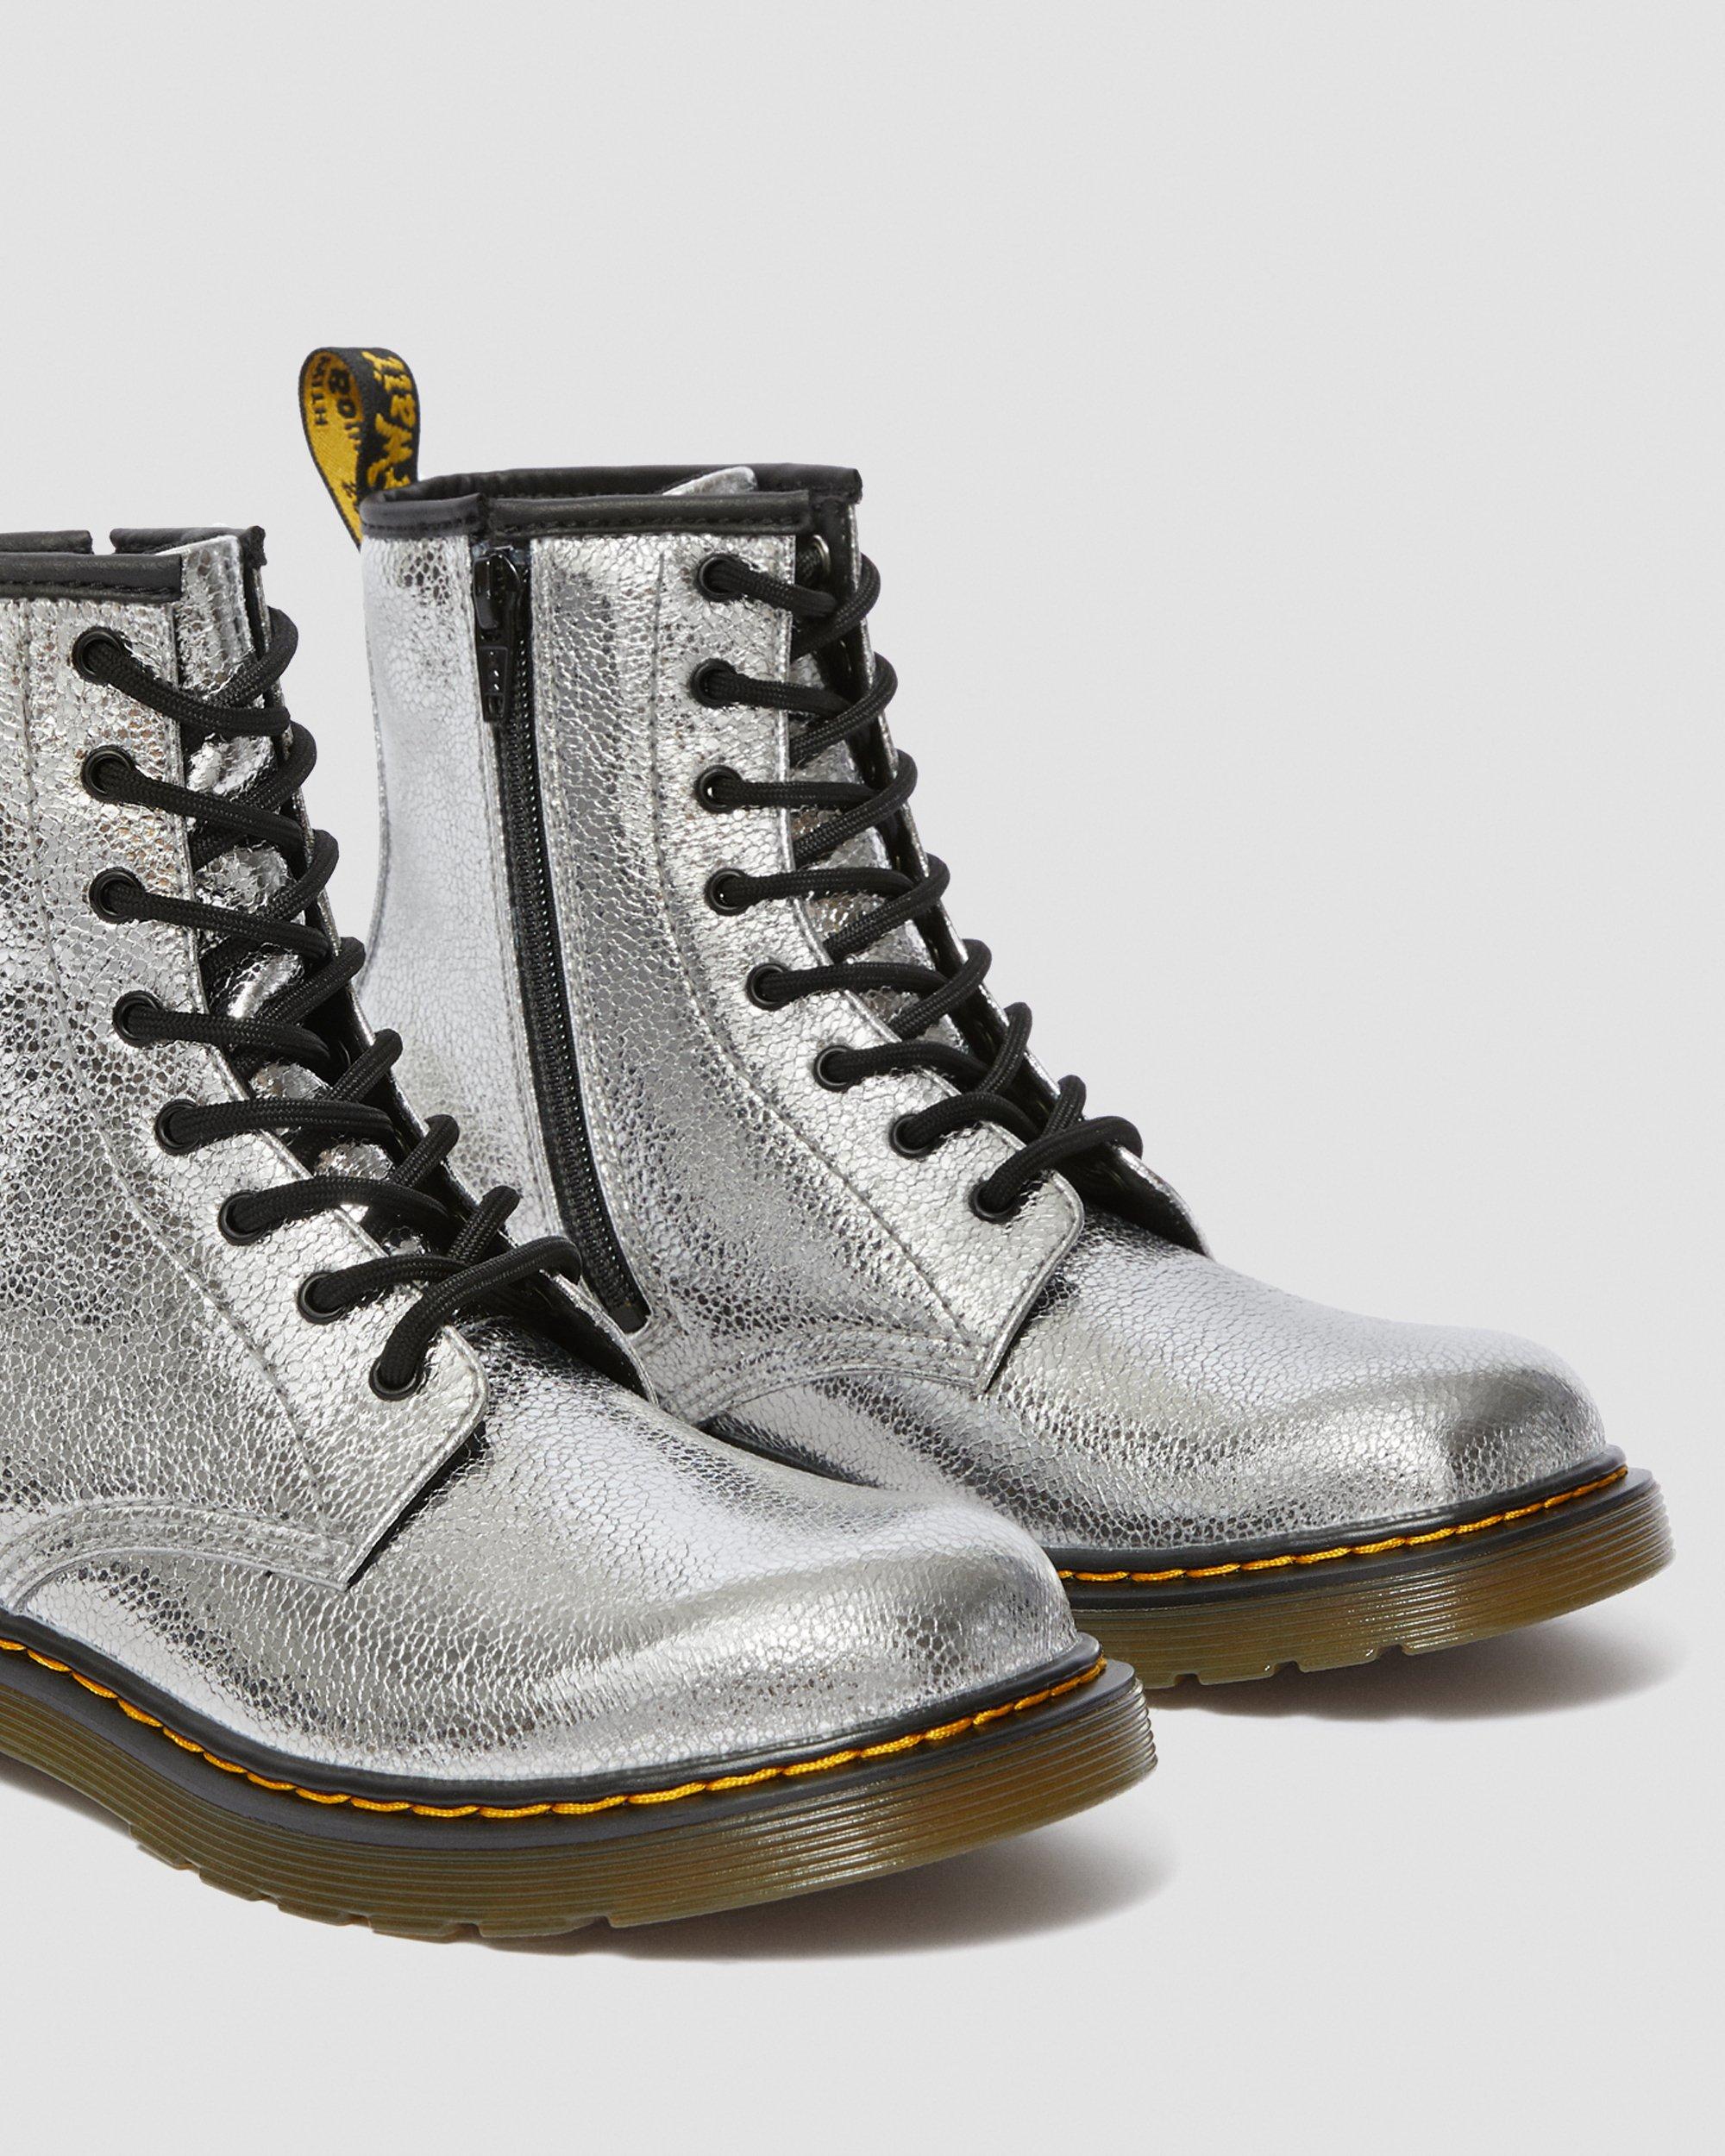 Youth 1460 Crinkle Metallic Lace Up Boots in Silver